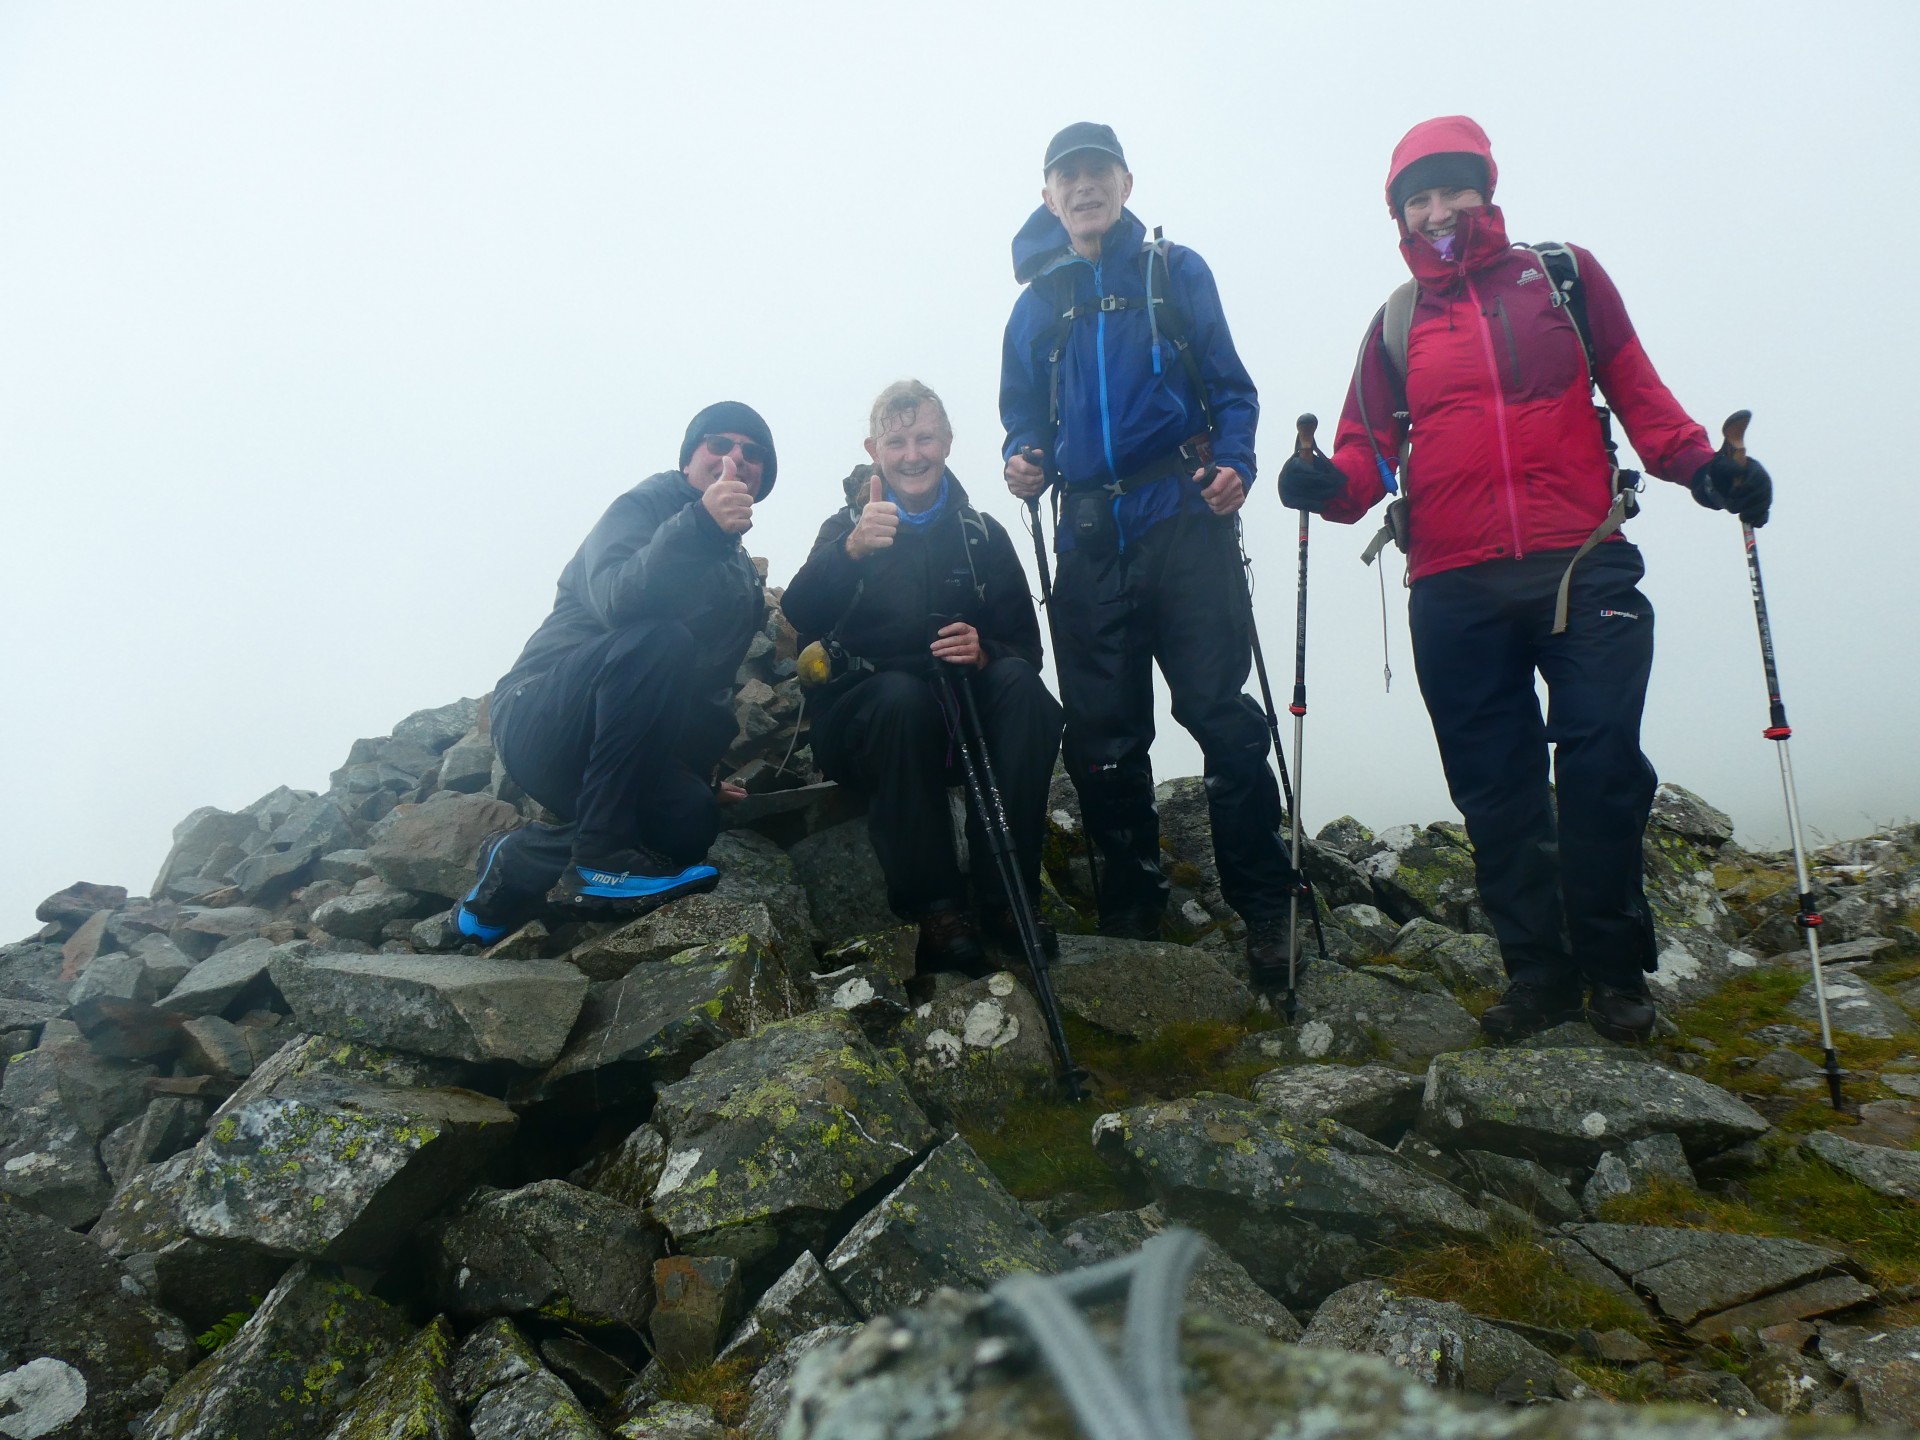 A wet but happy finish on White Pike, beyond Clough Head